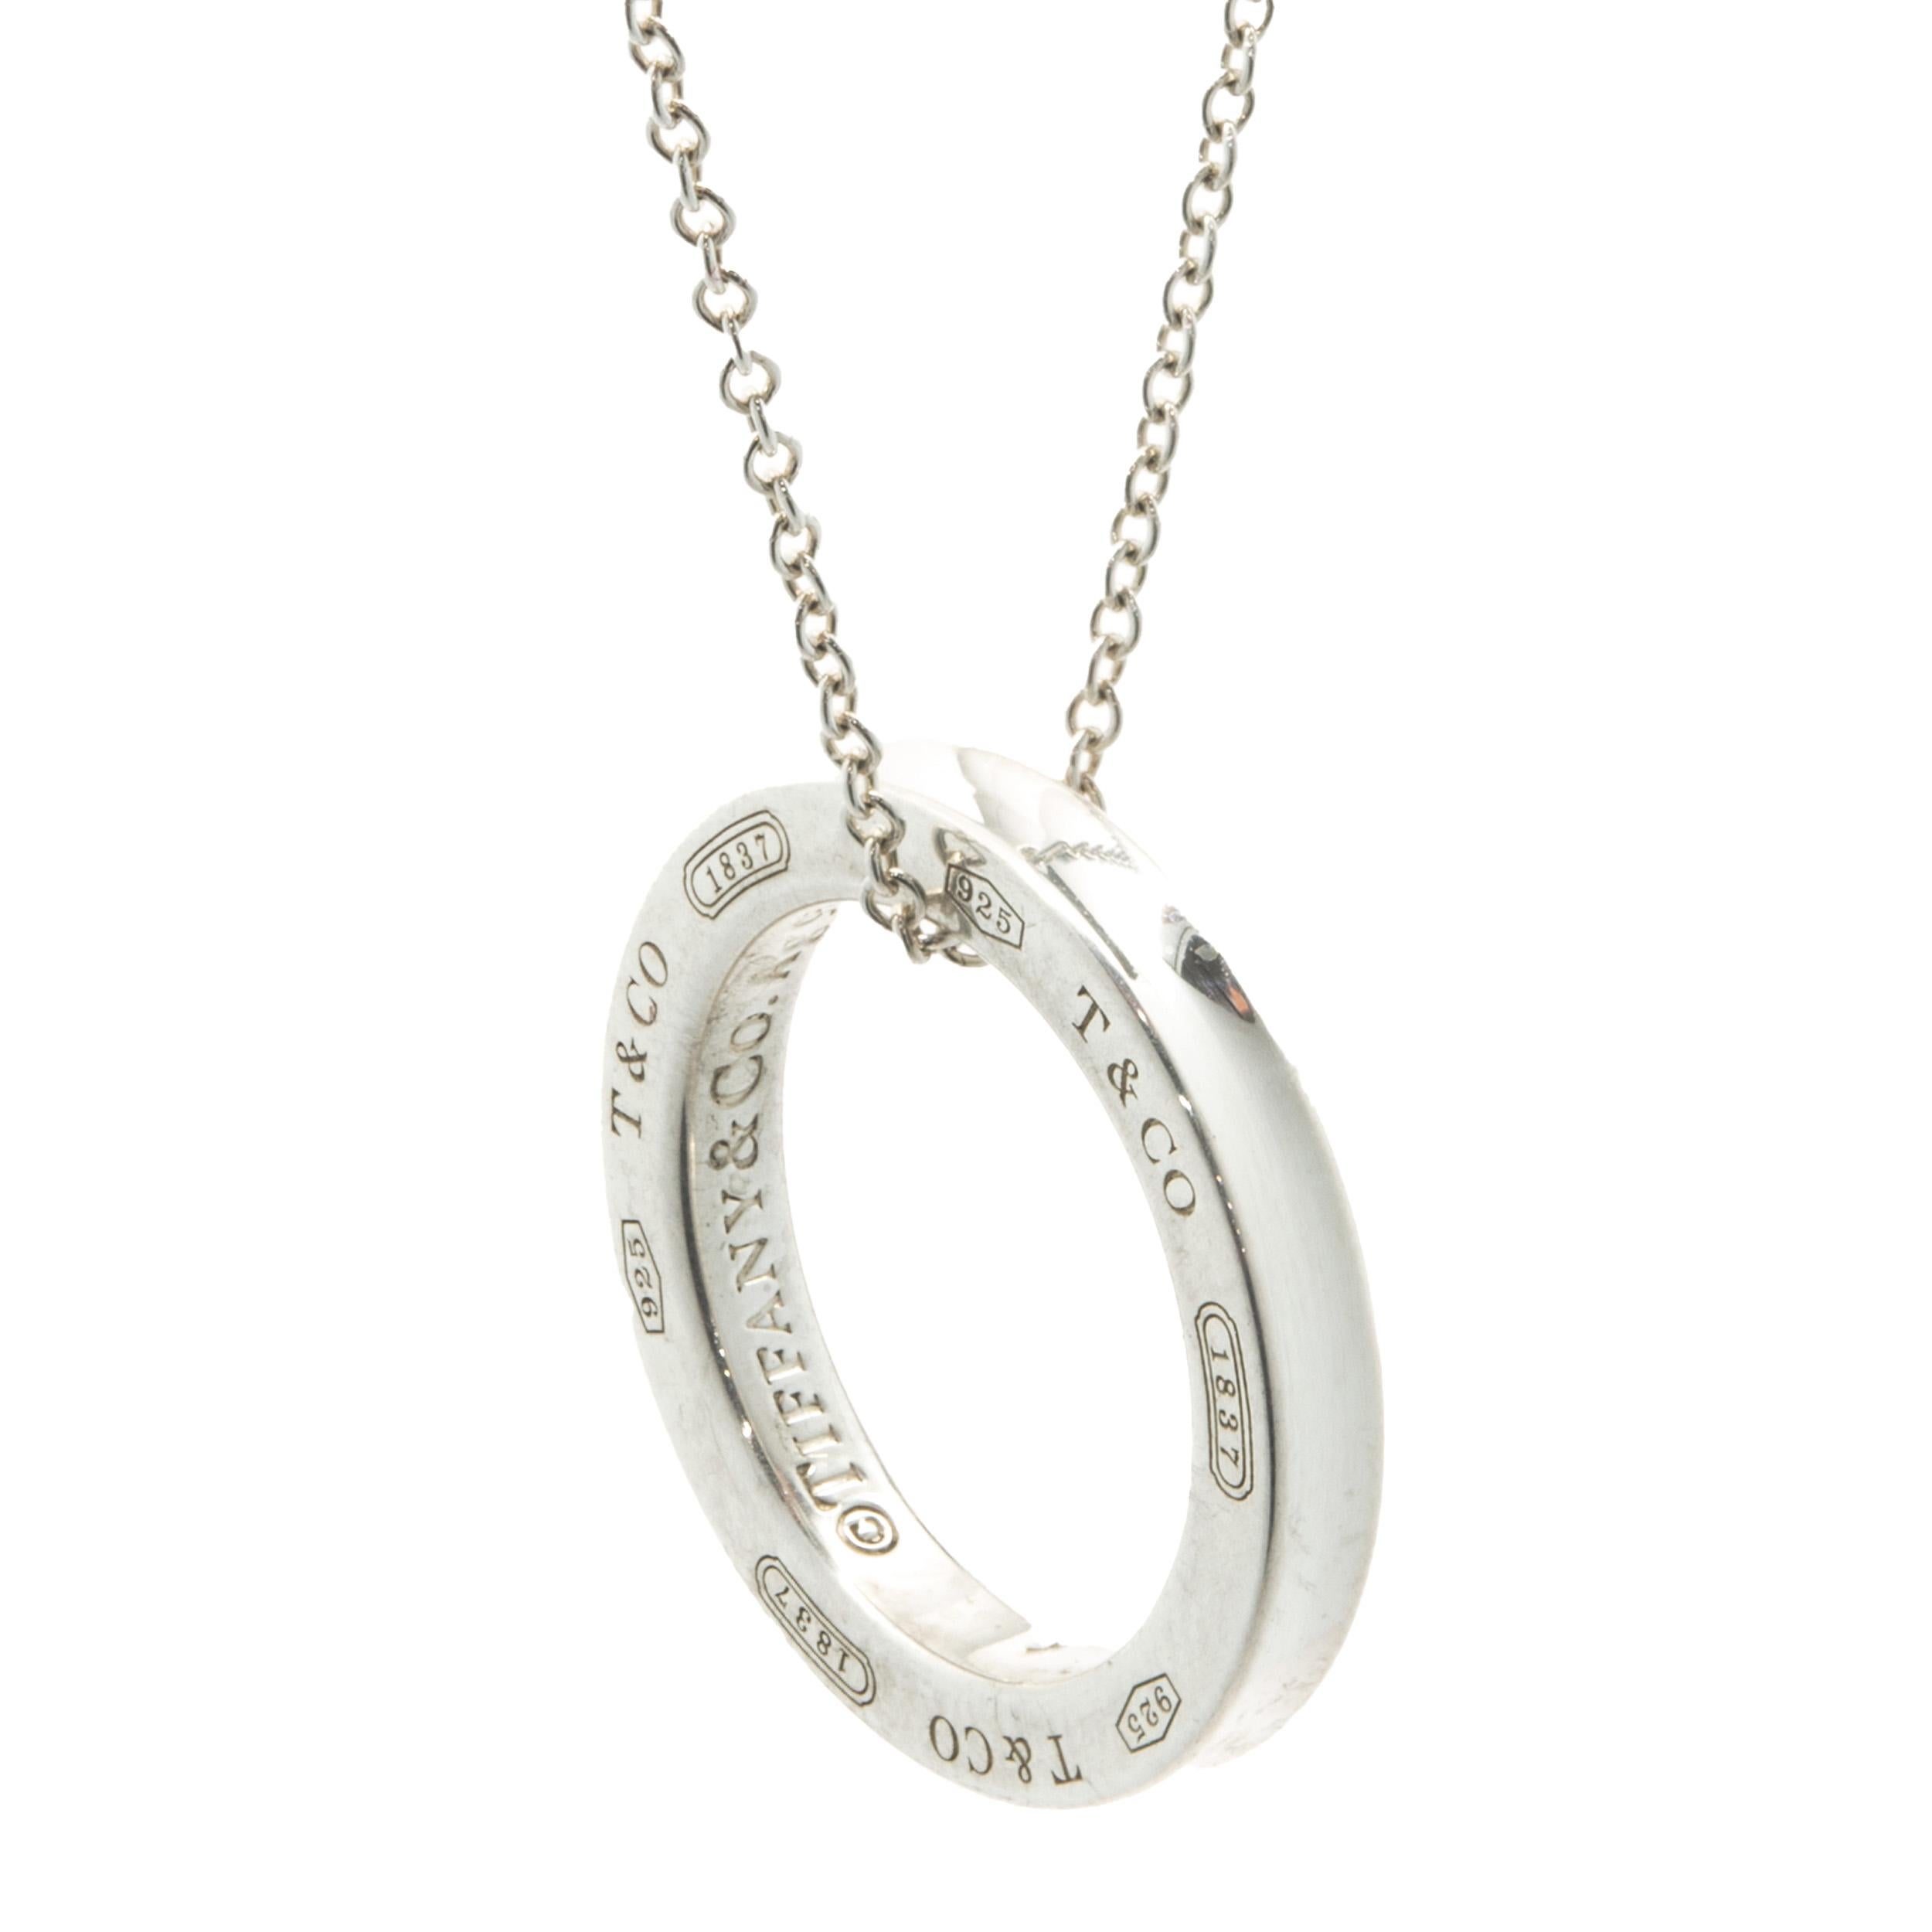 Designer: Tiffany & Co. 
Material: sterling silver
Dimensions: necklace measures 16-inches
Weight: 3.86 grams
